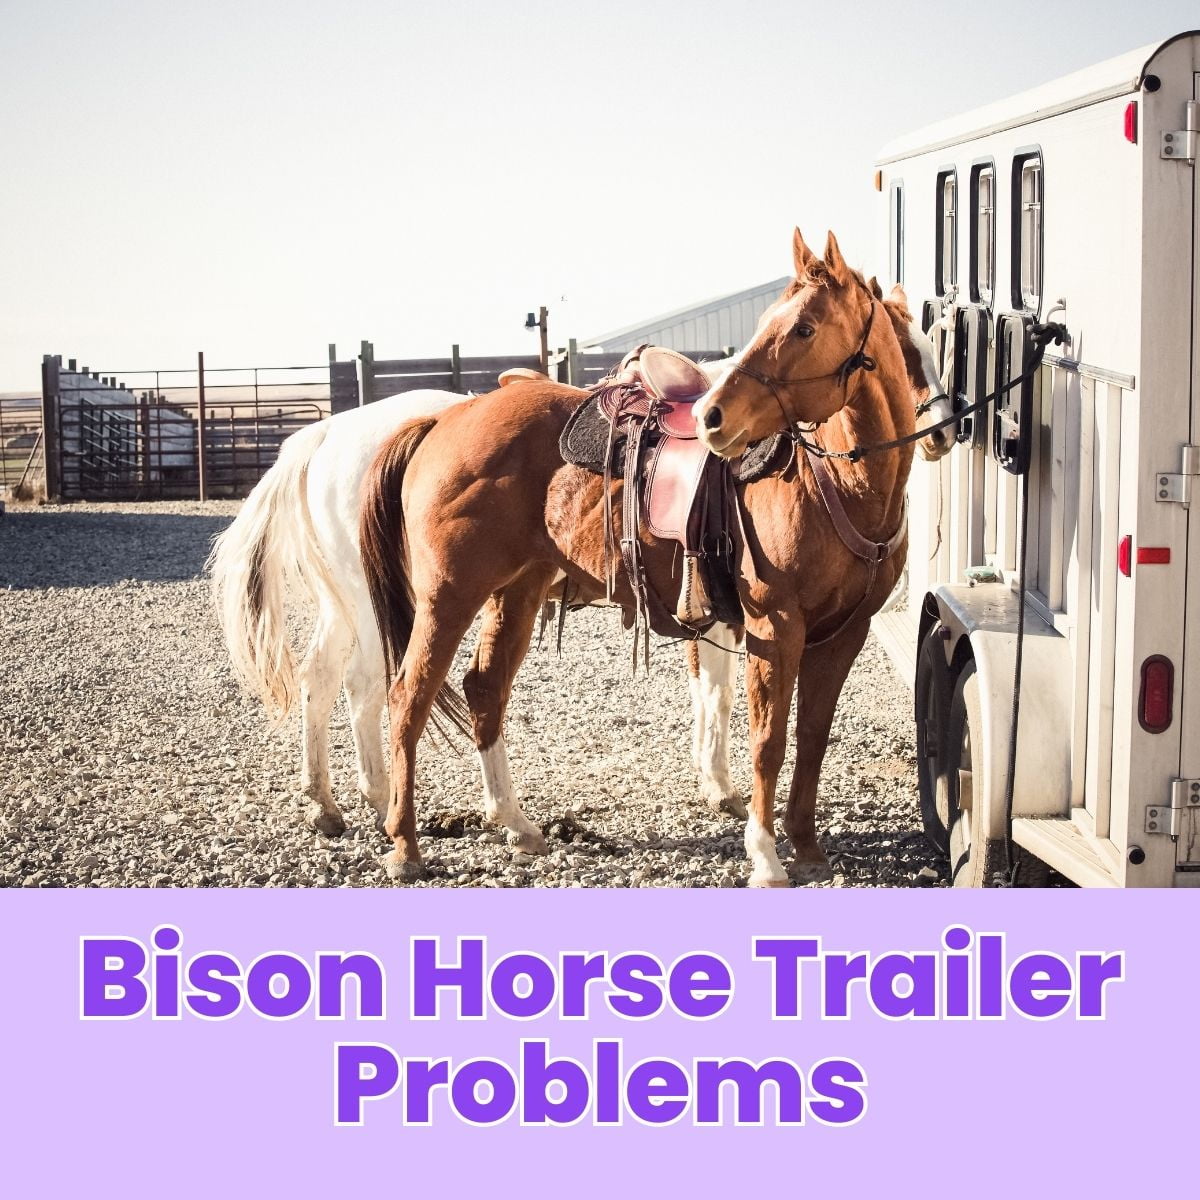 You are currently viewing Bison Horse Trailer Problems